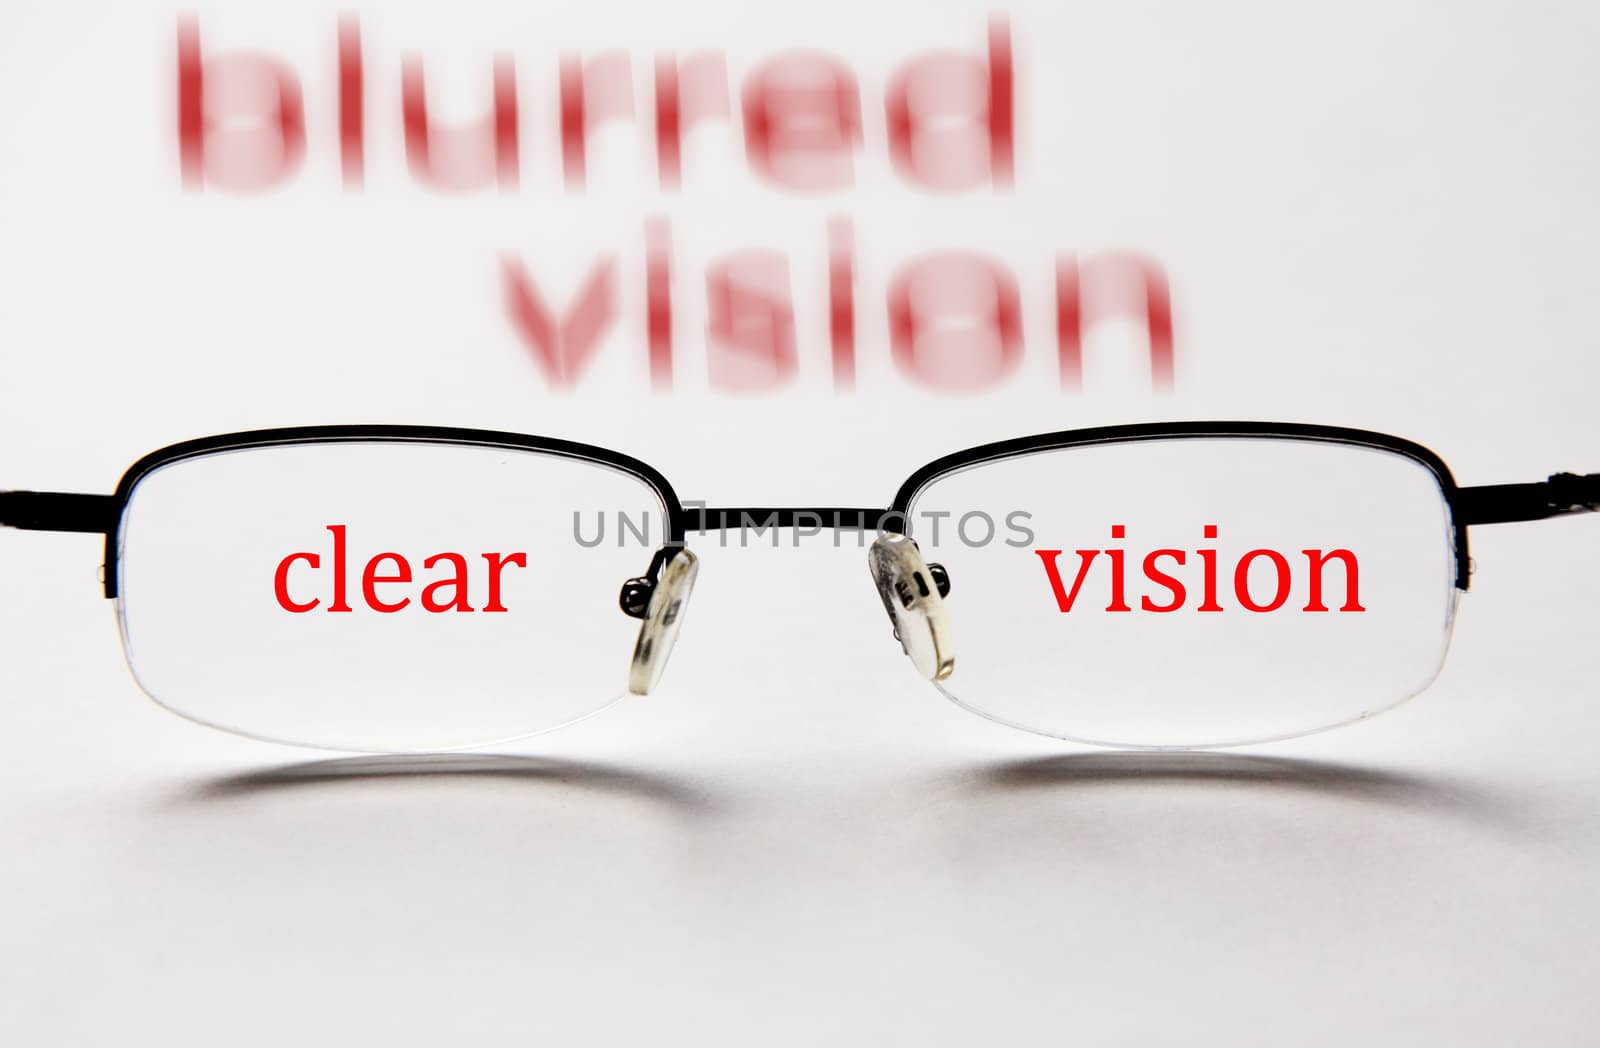 blurred vision and clear vision with eyeglasses concept to test your eyesight